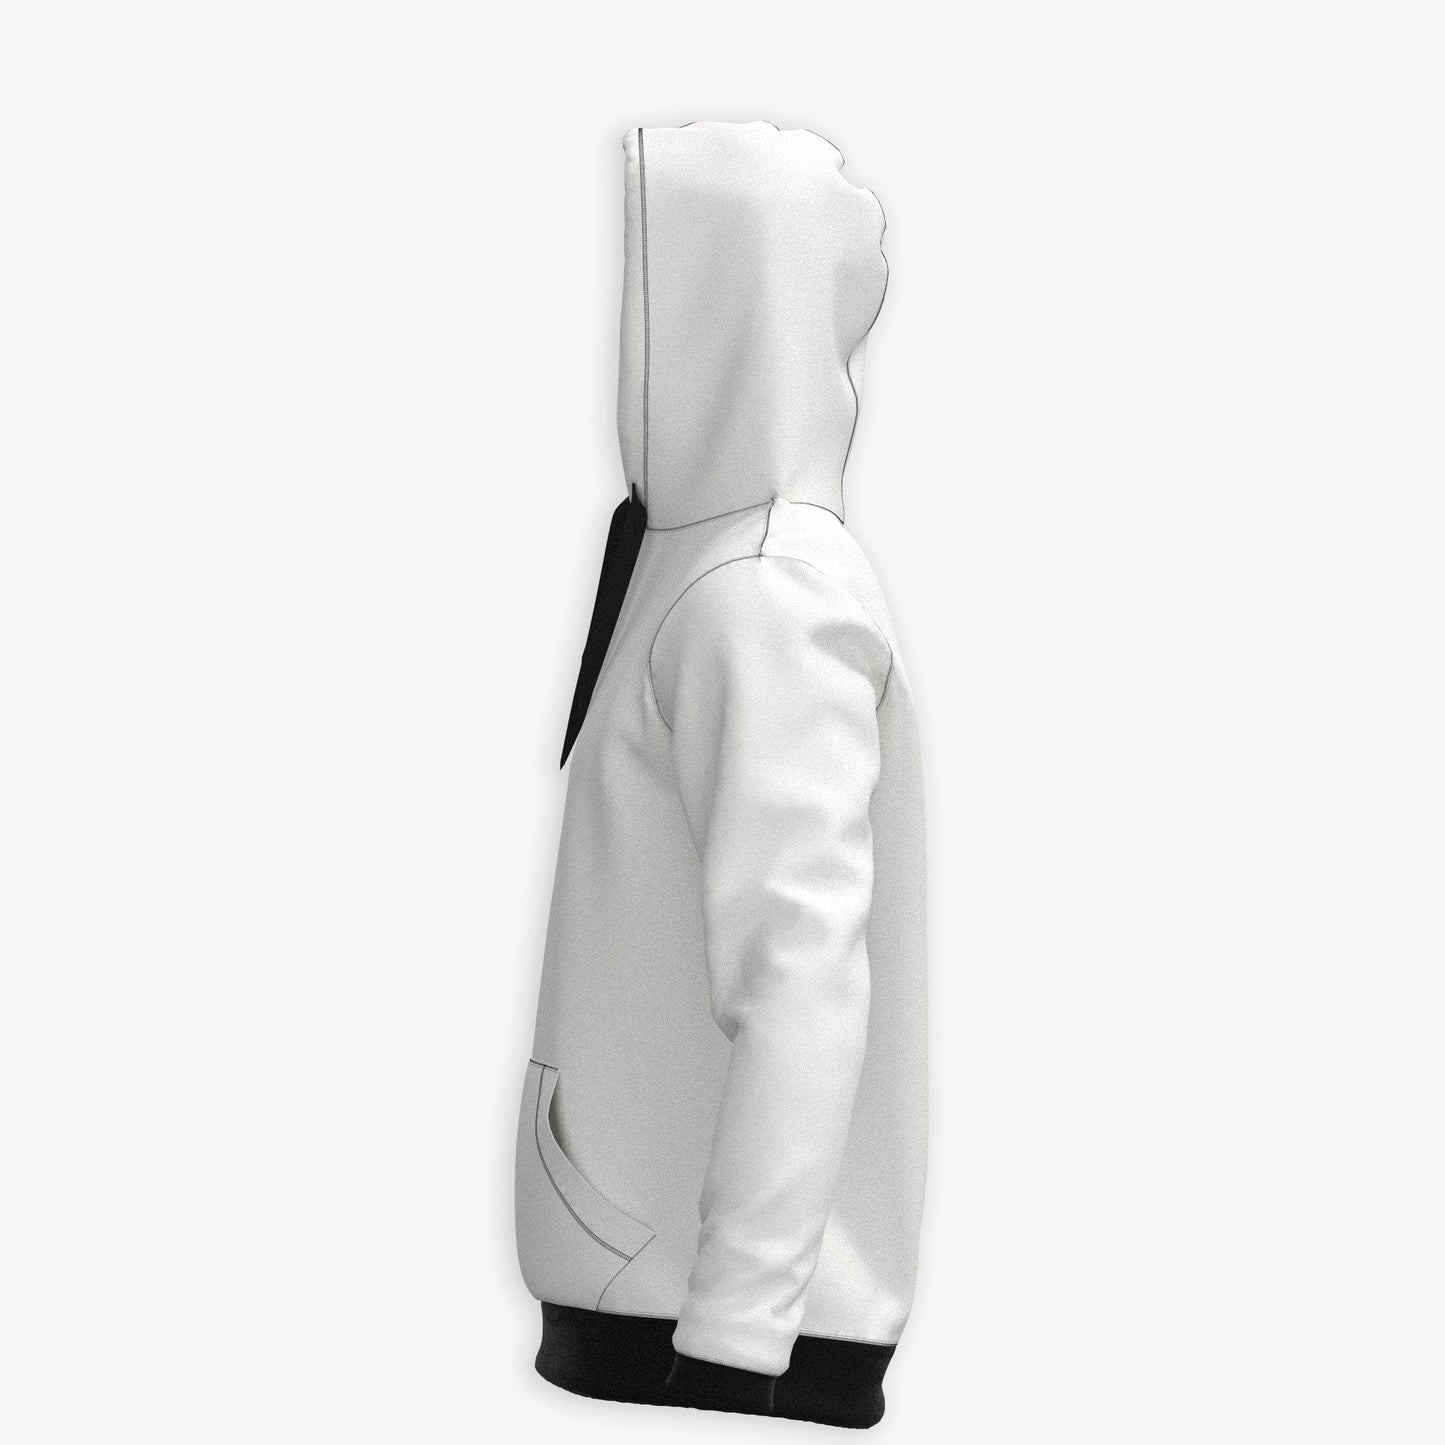 My Custom Design Physical product DryTECH Pullover Hoodie